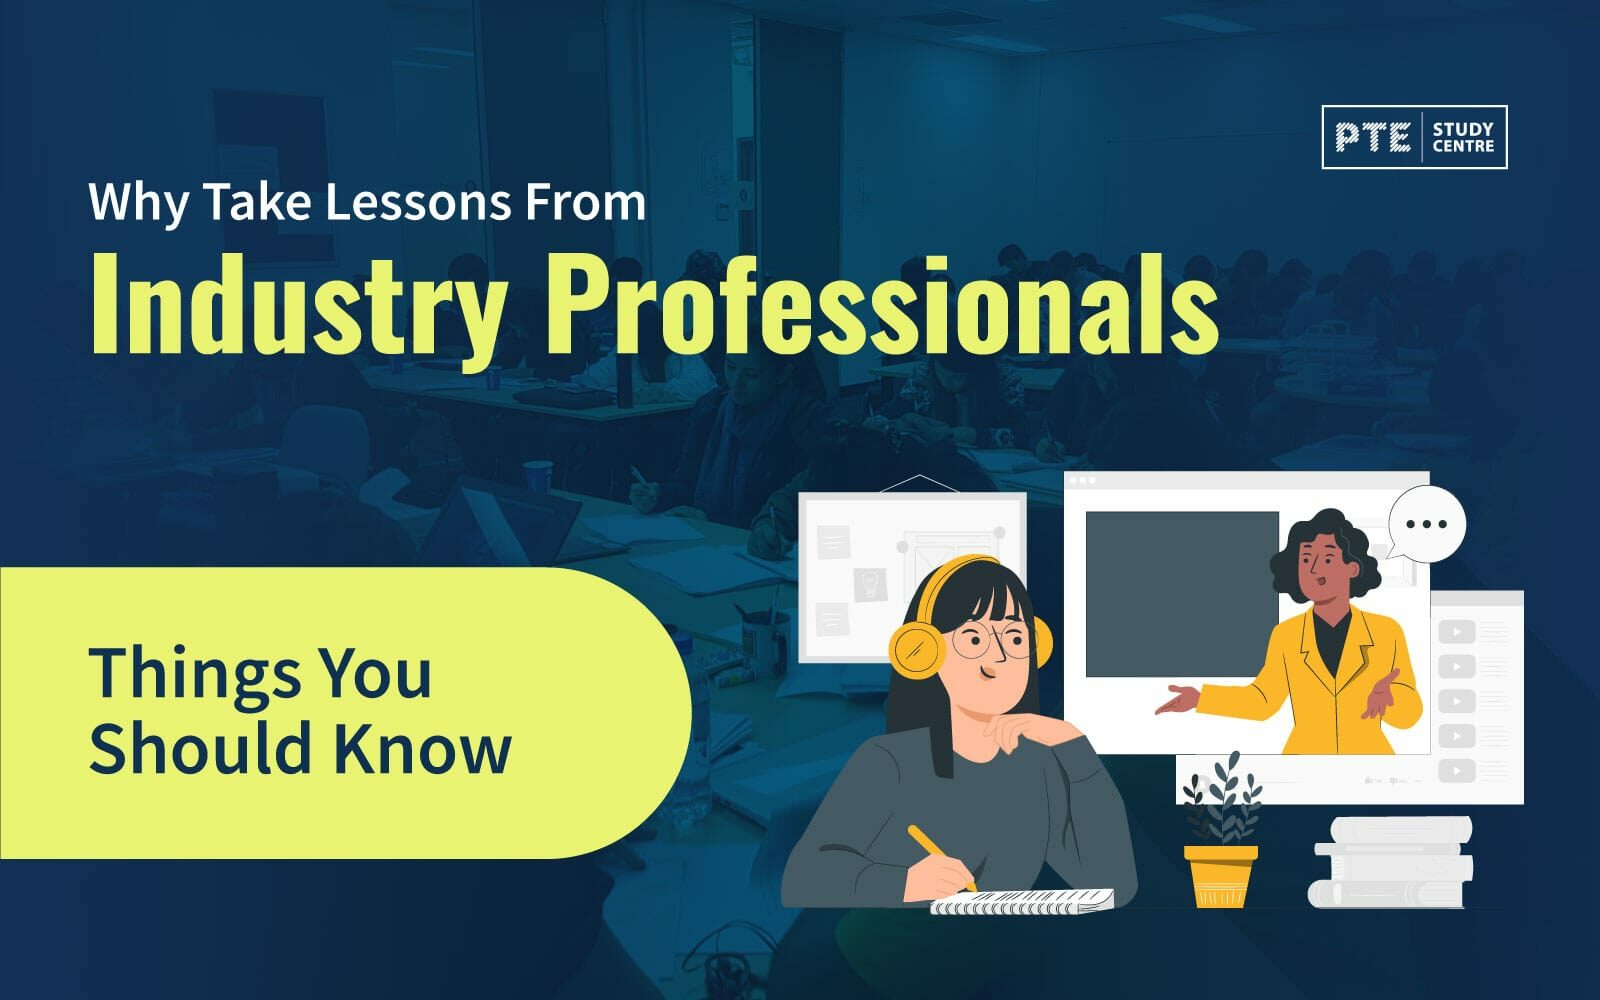 Why Take Lessons From Industry Professionals